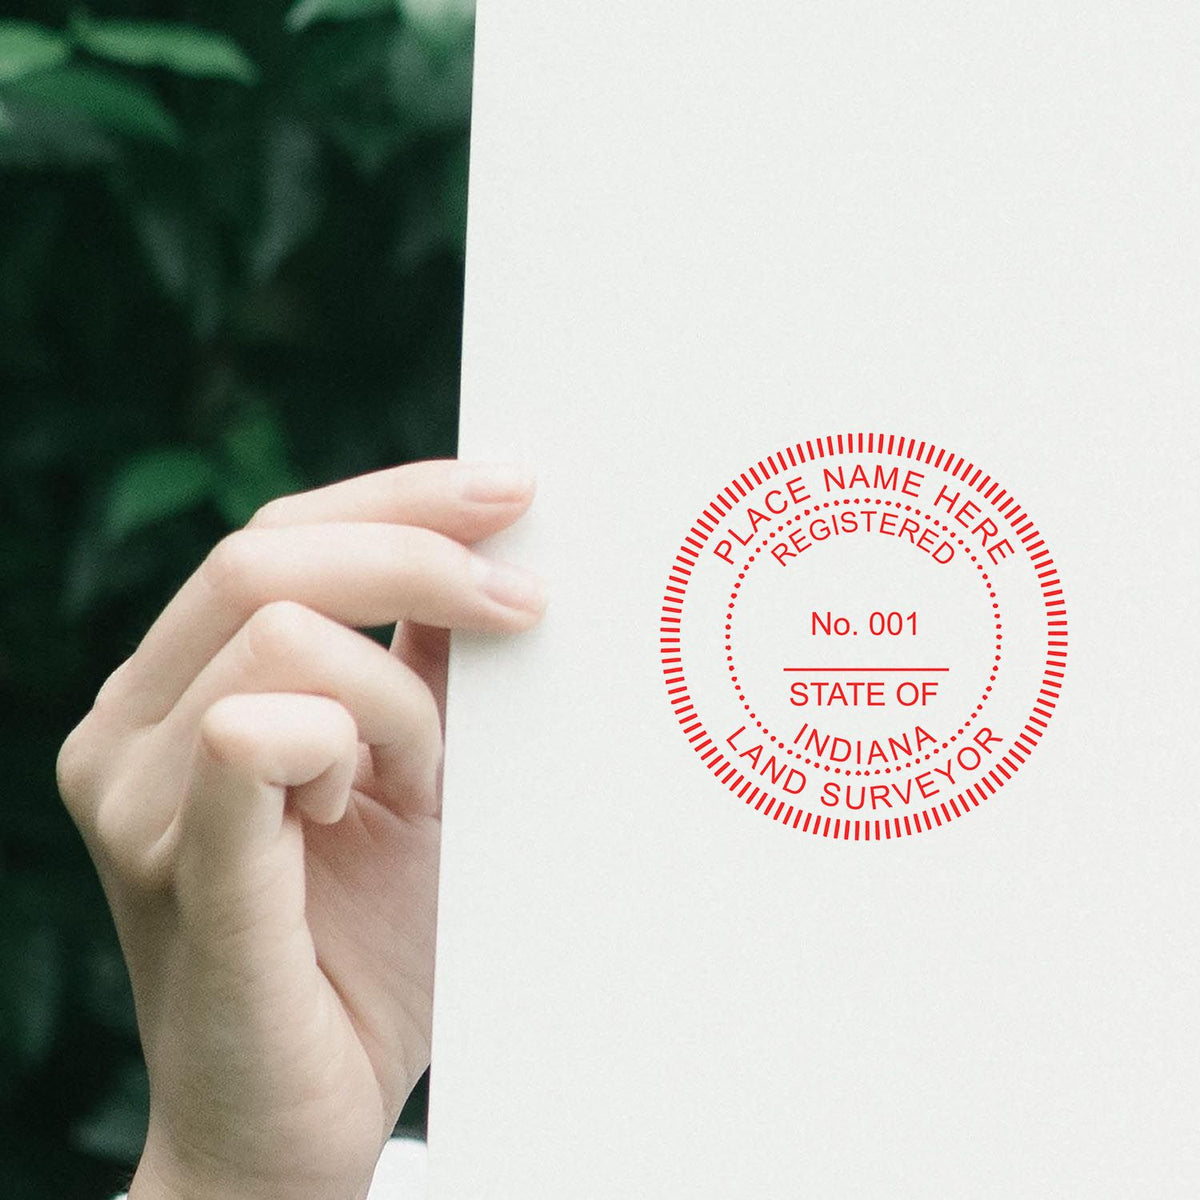 The Slim Pre-Inked Indiana Land Surveyor Seal Stamp stamp impression comes to life with a crisp, detailed photo on paper - showcasing true professional quality.